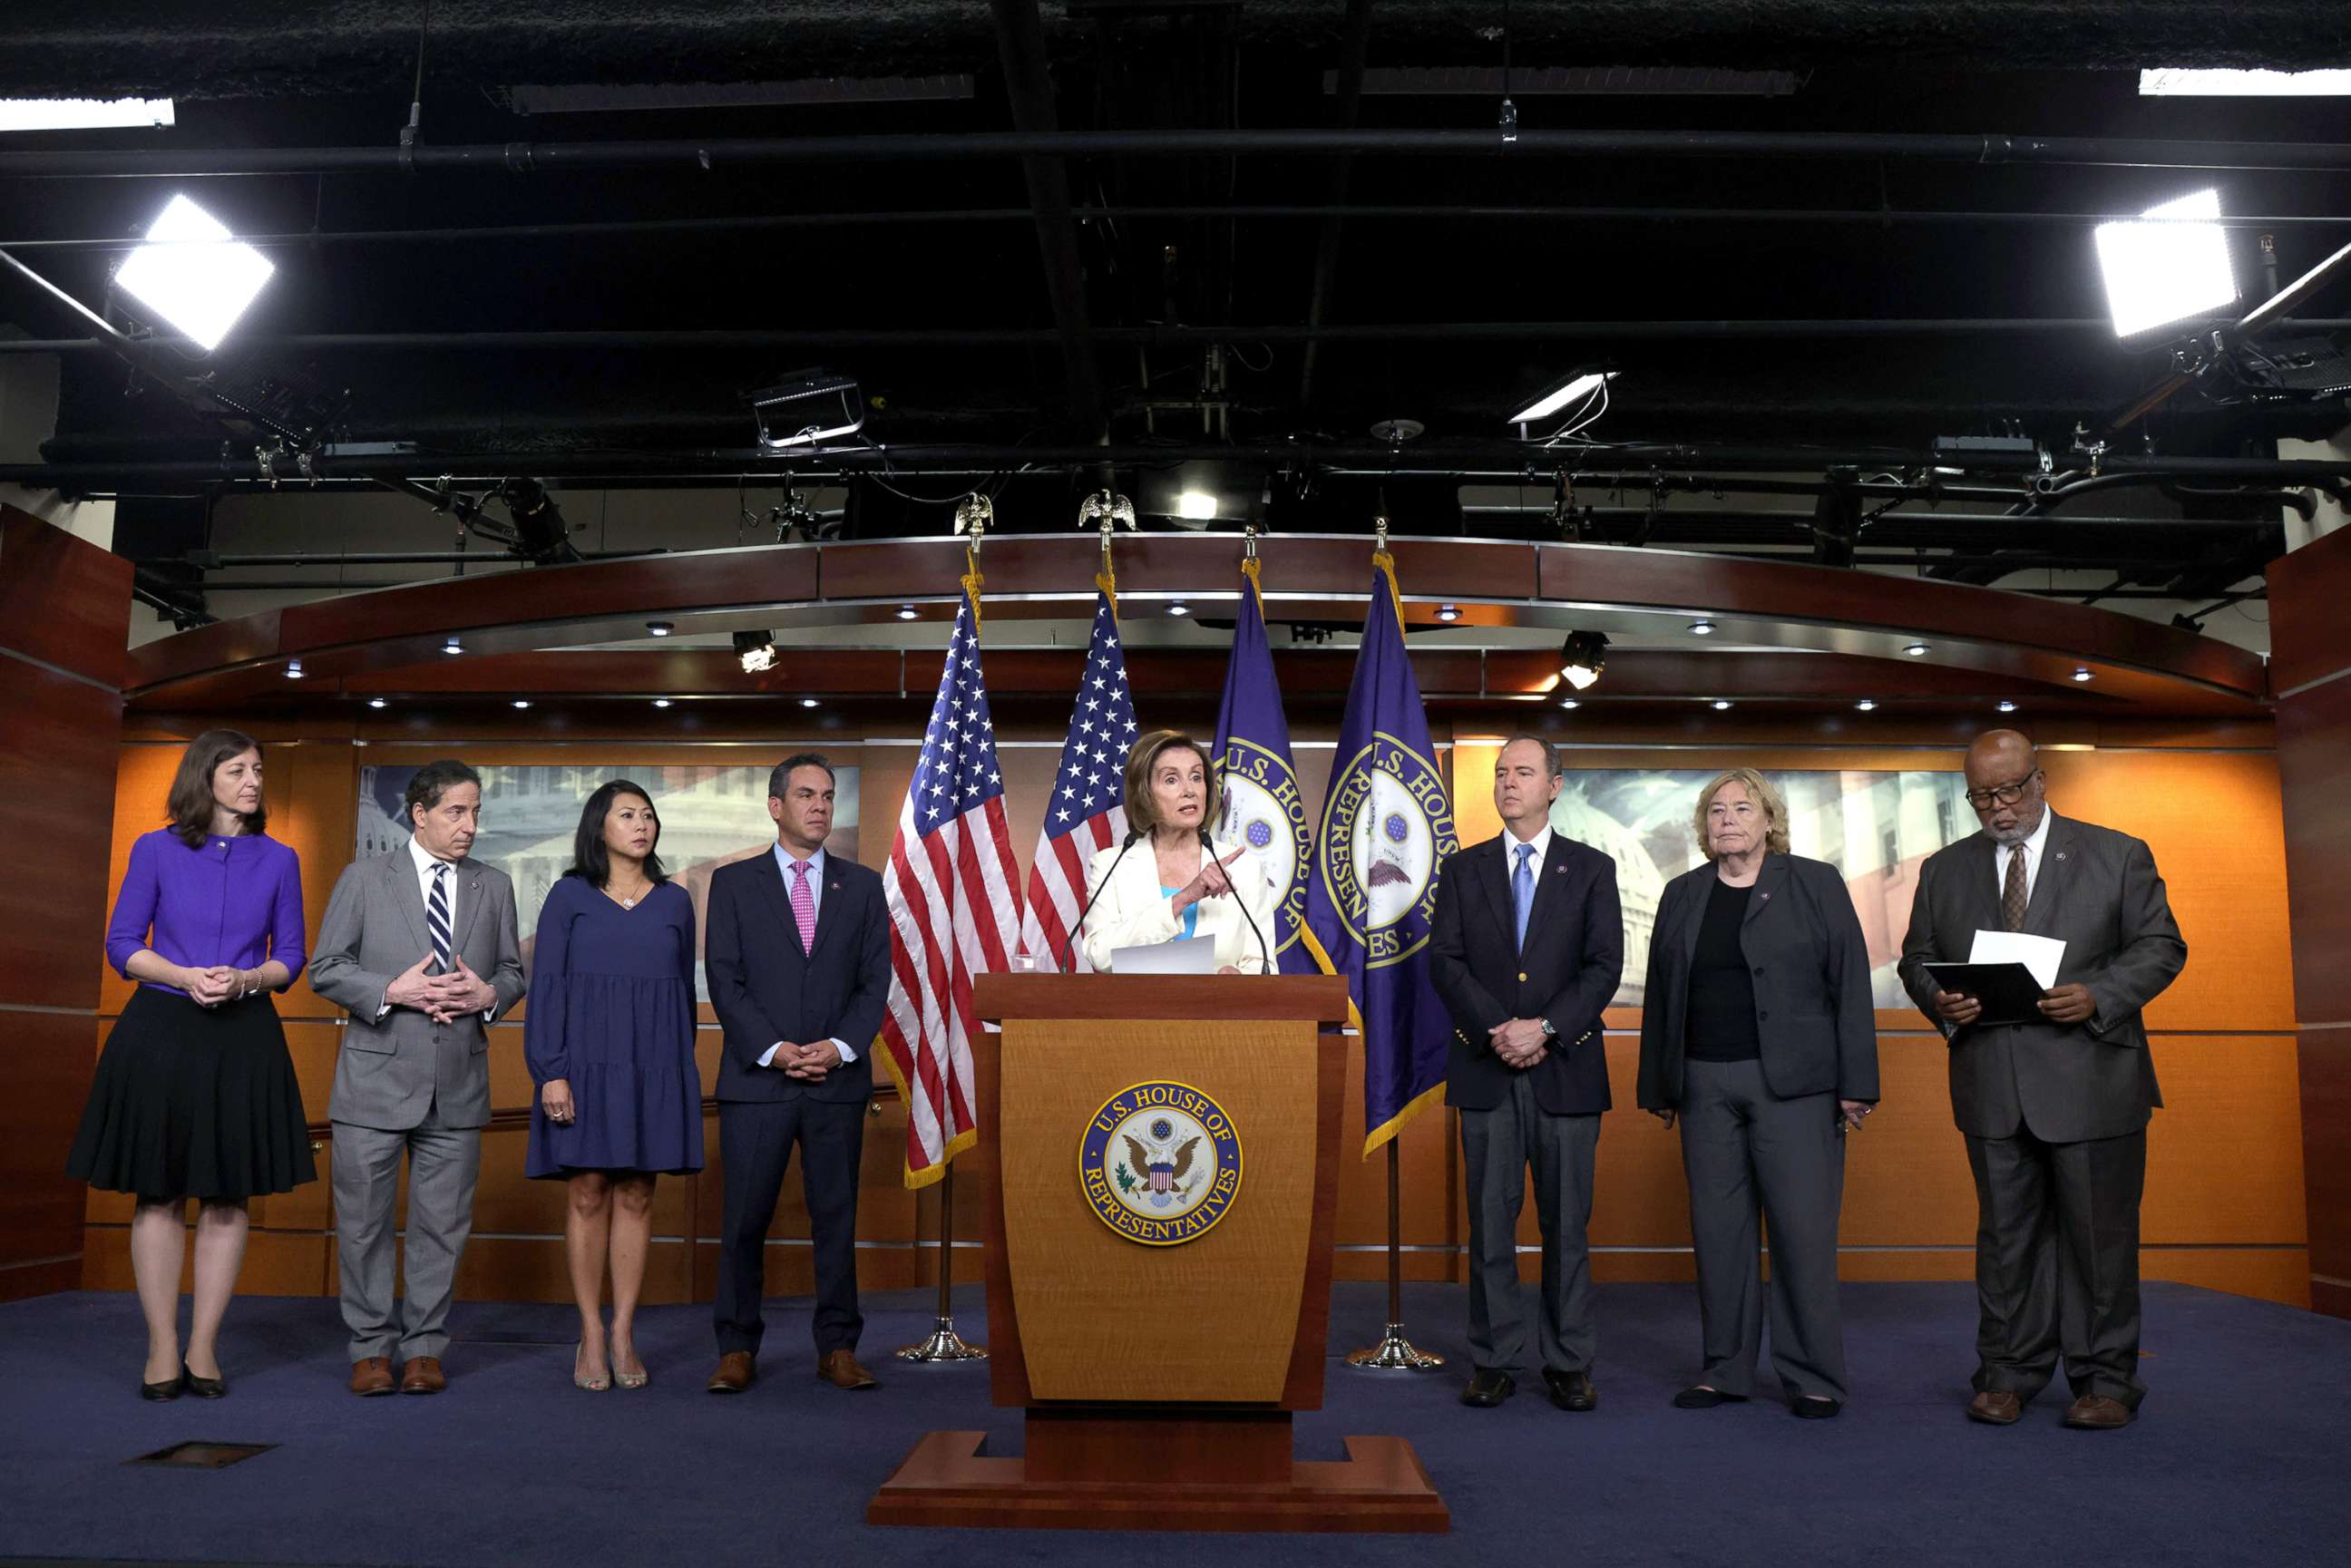 PHOTO: Speaker of the House Rep. Nancy Pelosi announced her appointments of House Democratic members to the select committee to investigate the January 6th attack on the U.S. Capitol, July 1, 2021.